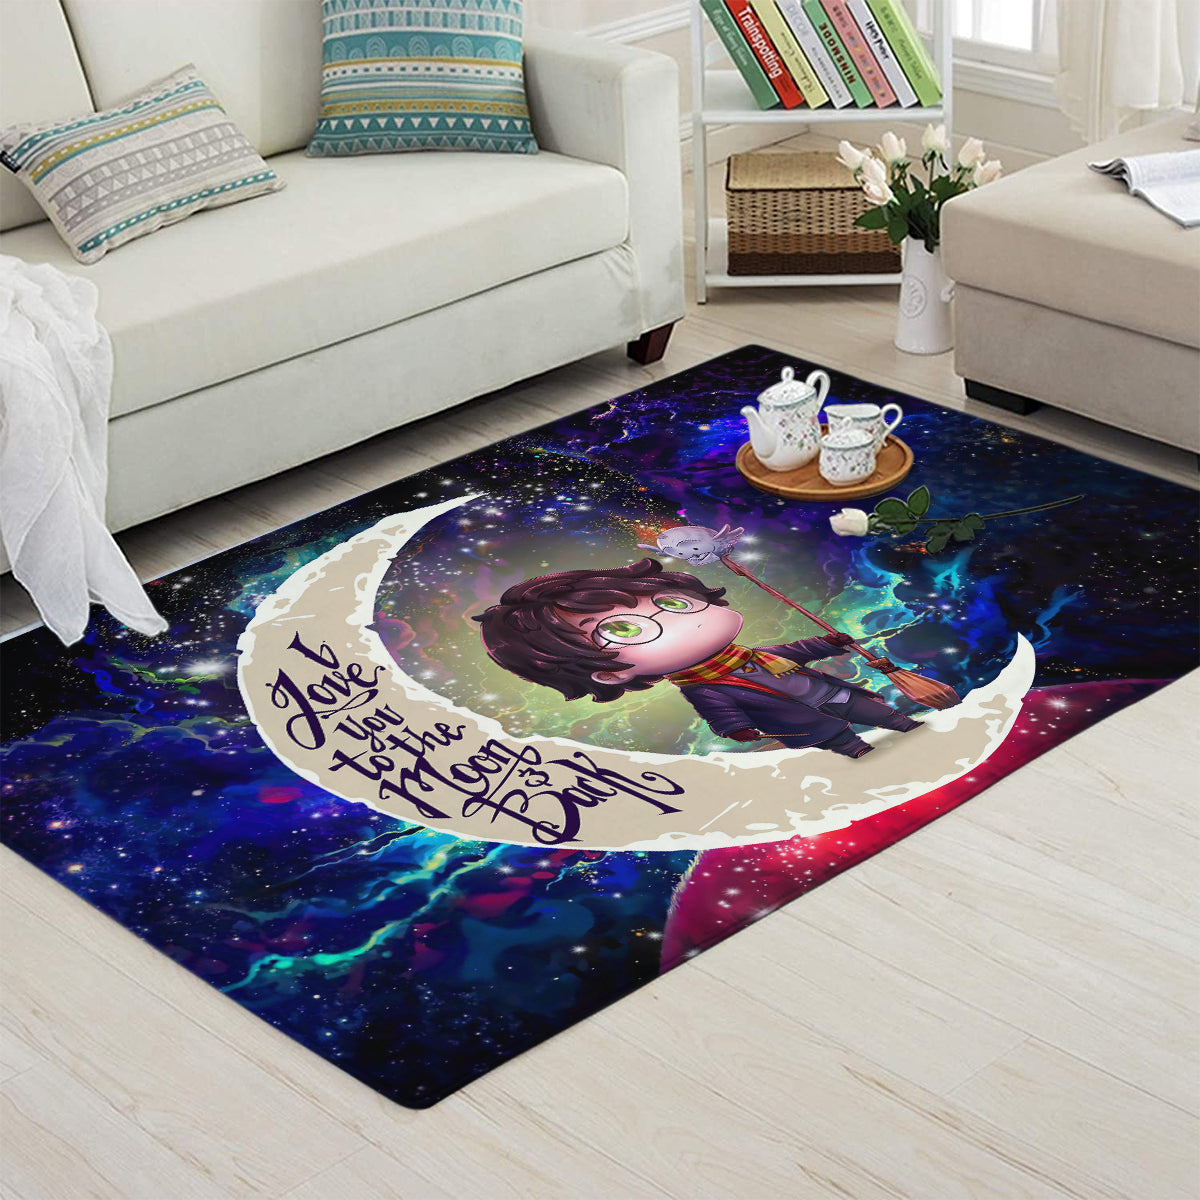 Harry Potter Chibi Love You To The Moon Galaxy Carpet Rug Home Room Decor